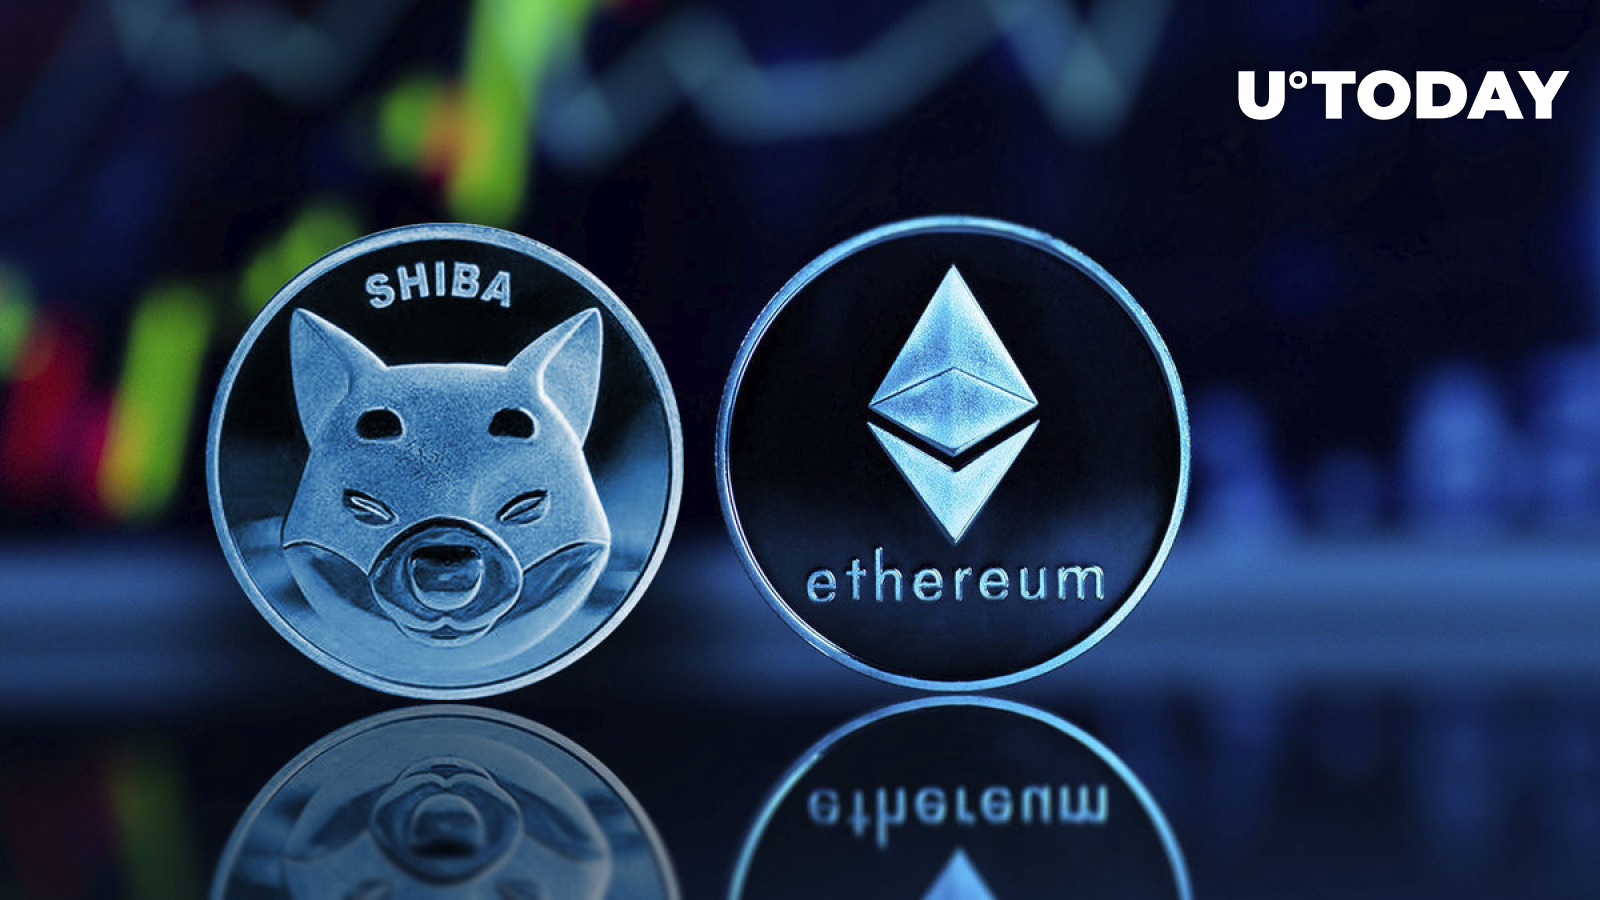 Shiba Inu (SHIB) Lead Dev’s Ethereum (ETH) Domain Name for Sale, Here’s for How Much